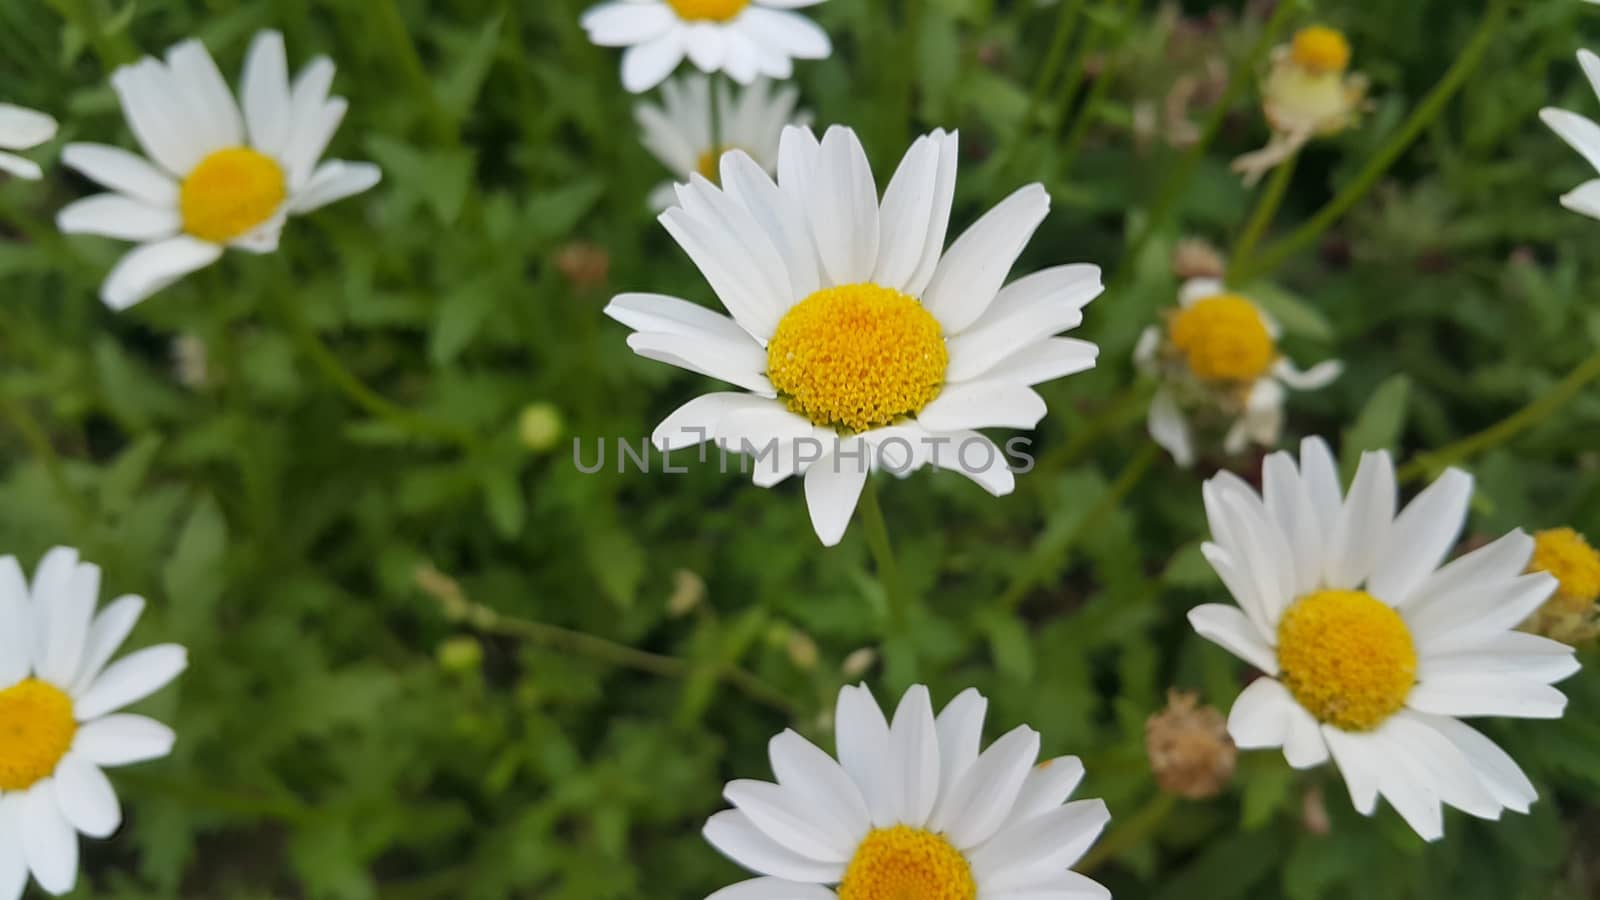 Closeup with selective focus on white flower with stamens and green leaves in background